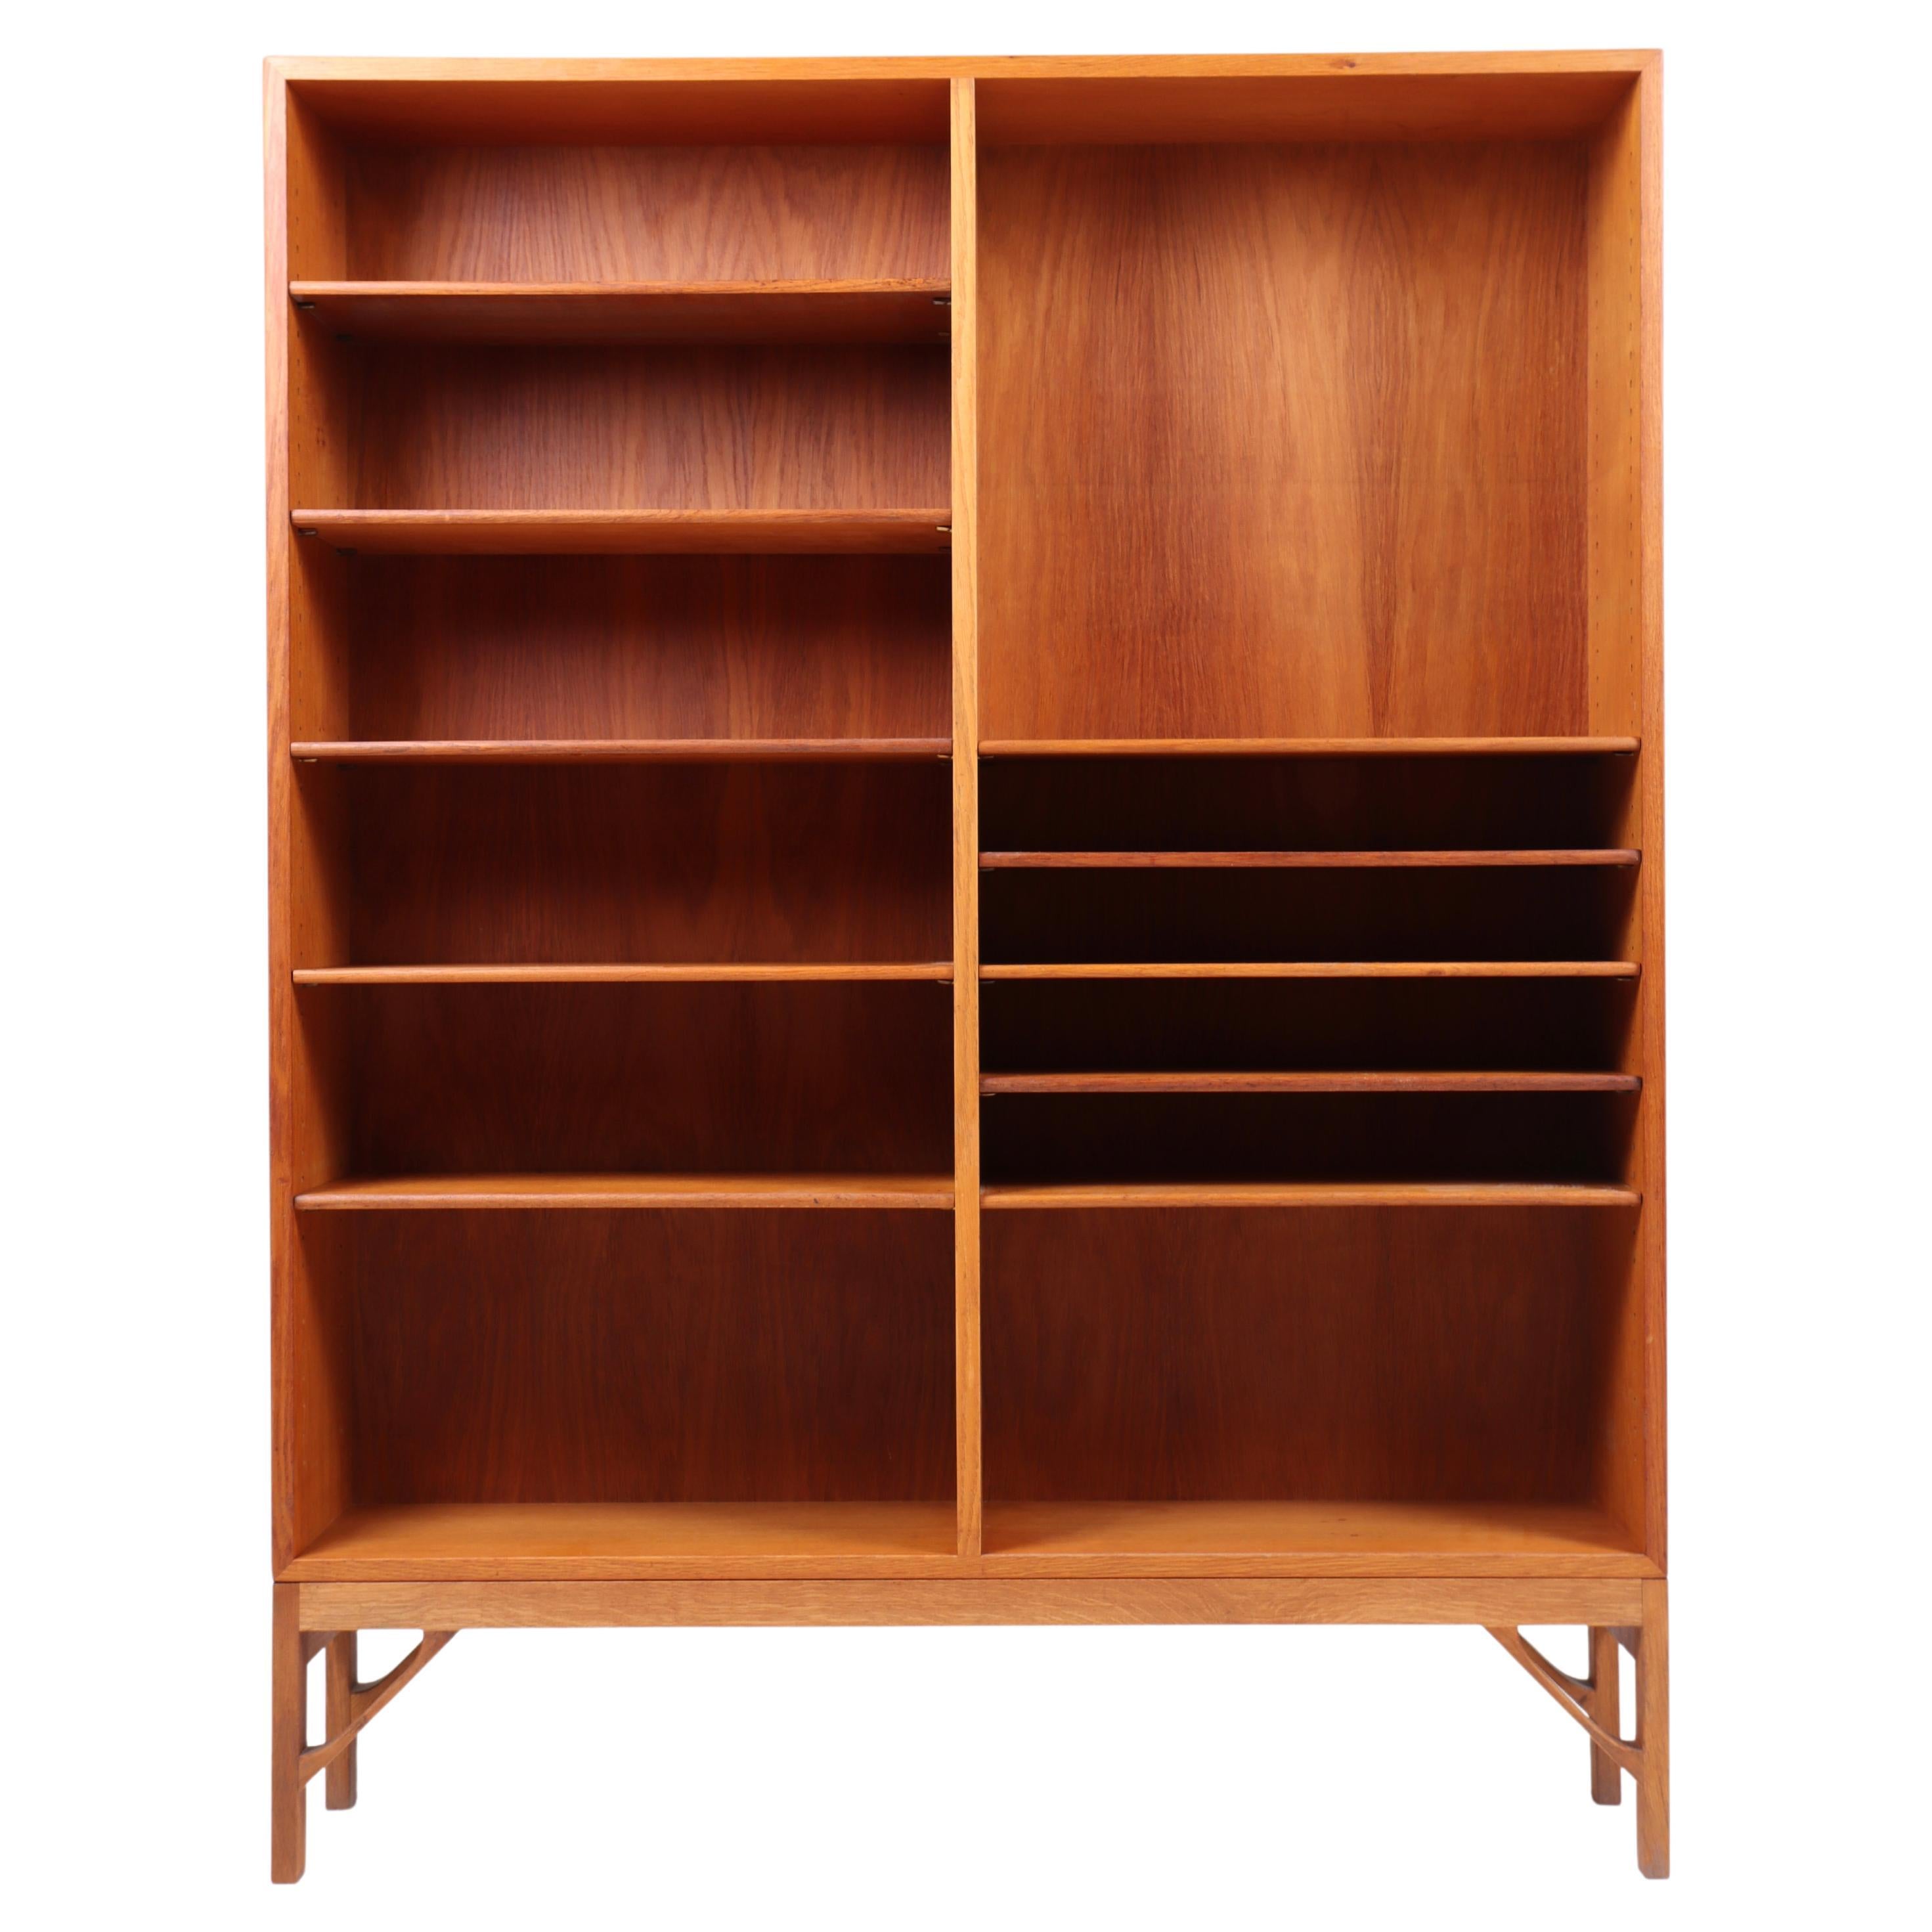 Tall Midcentury "China" Bookcase in Oak by Børge Mogensen, Made in Denmark 1960s For Sale